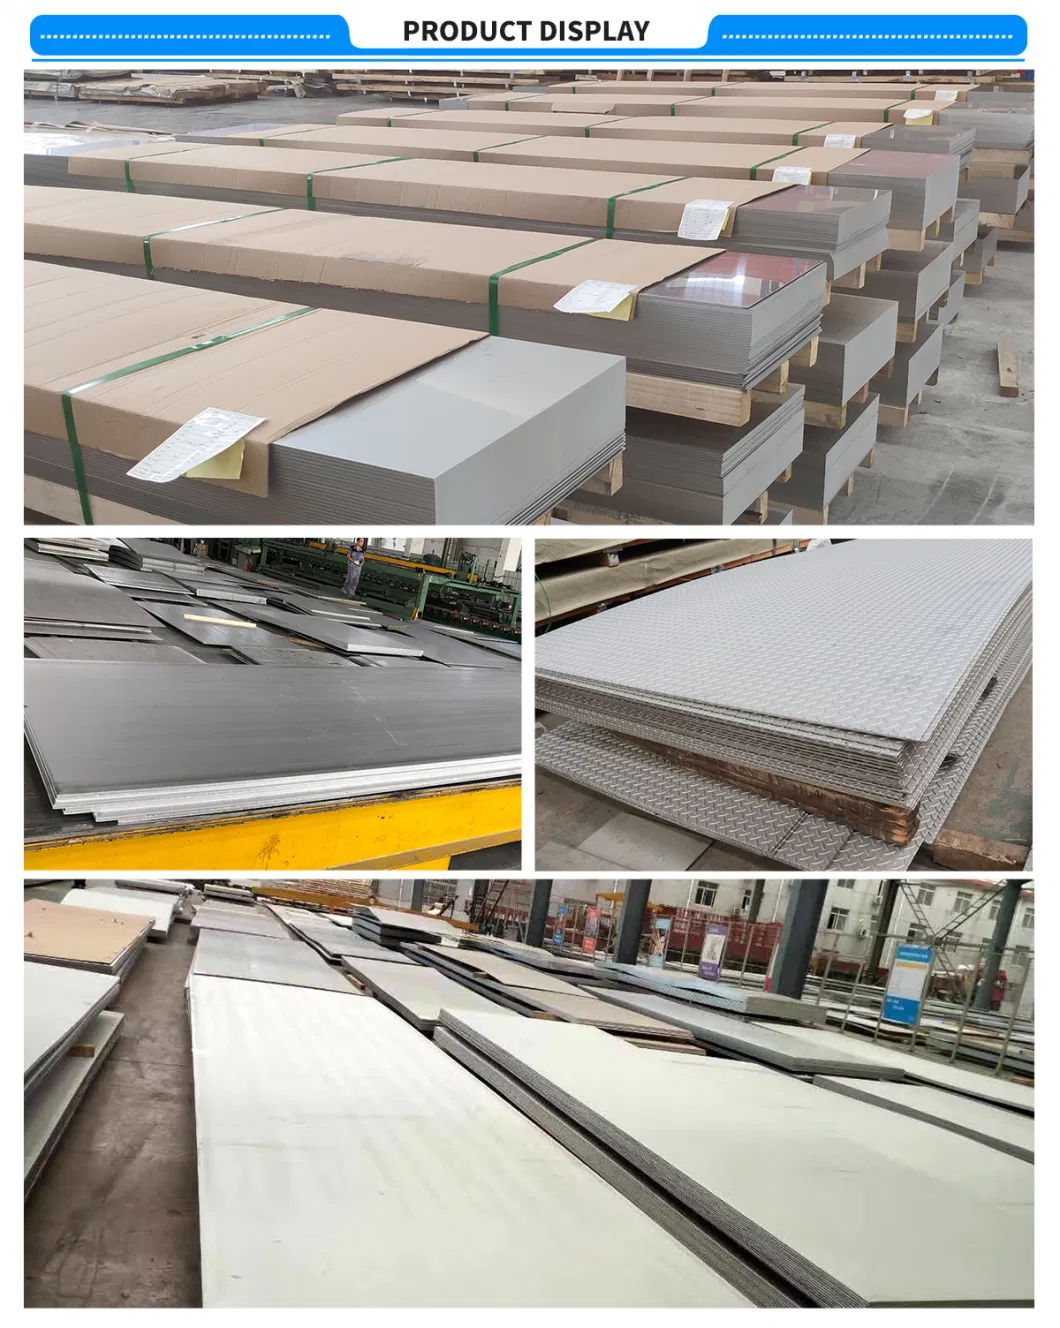 AISI SUS 4*8 5*10 Ss Sheet 0.3mm 0.5mm 0.8mm 1.0mm 1.2mm 1.5mm 2mm 3mm 2b 201 J1 J2 304 304L 316 321 Stainless Steel Sheet Plate Building Material